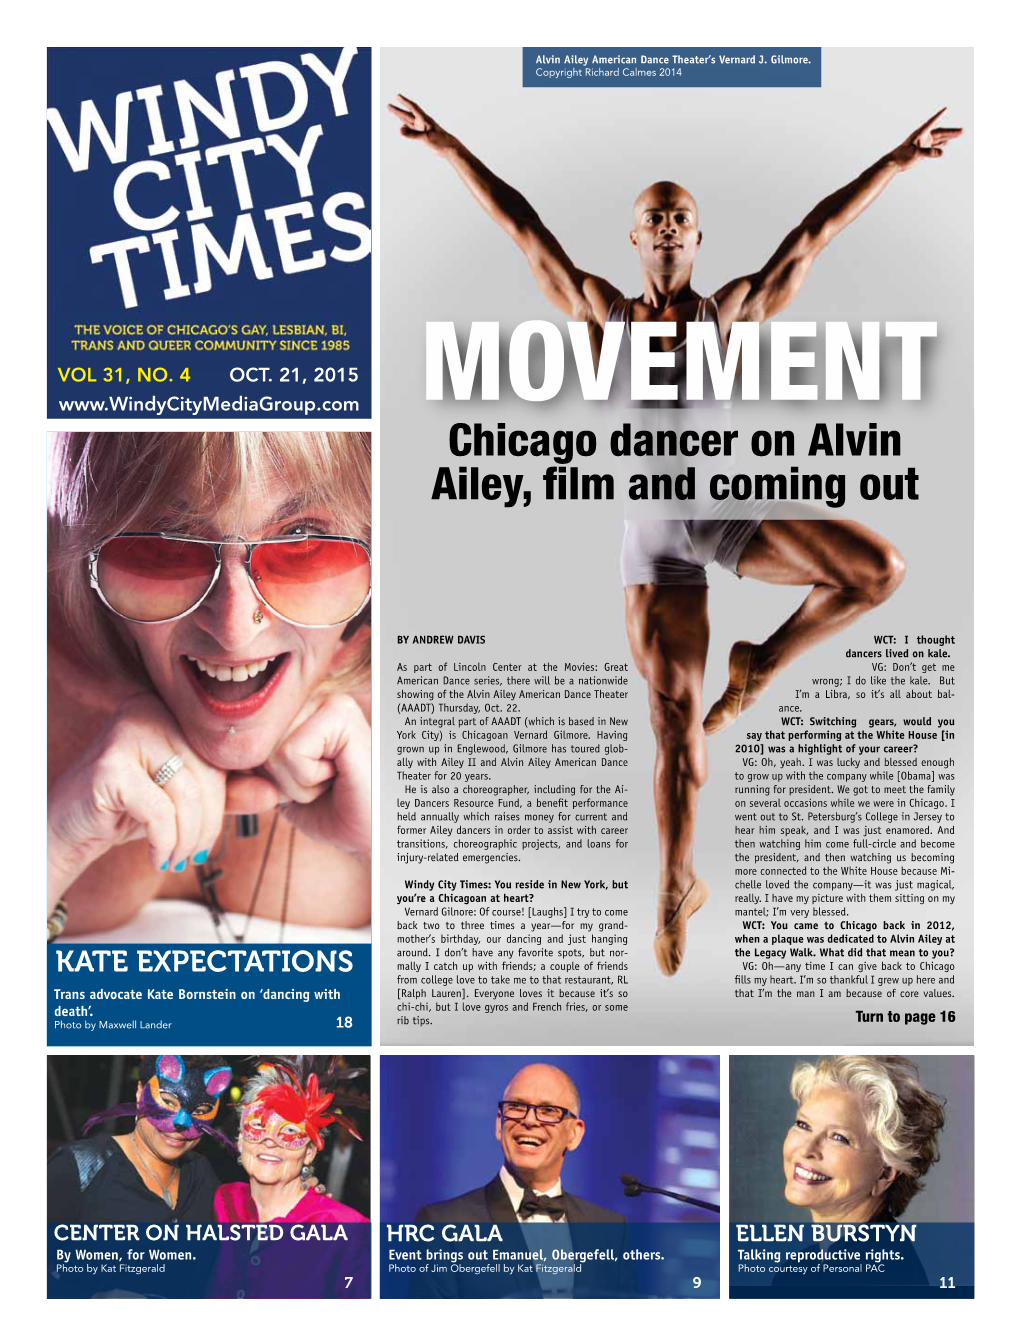 Chicago Dancer on Alvin Ailey, Film and Coming Out